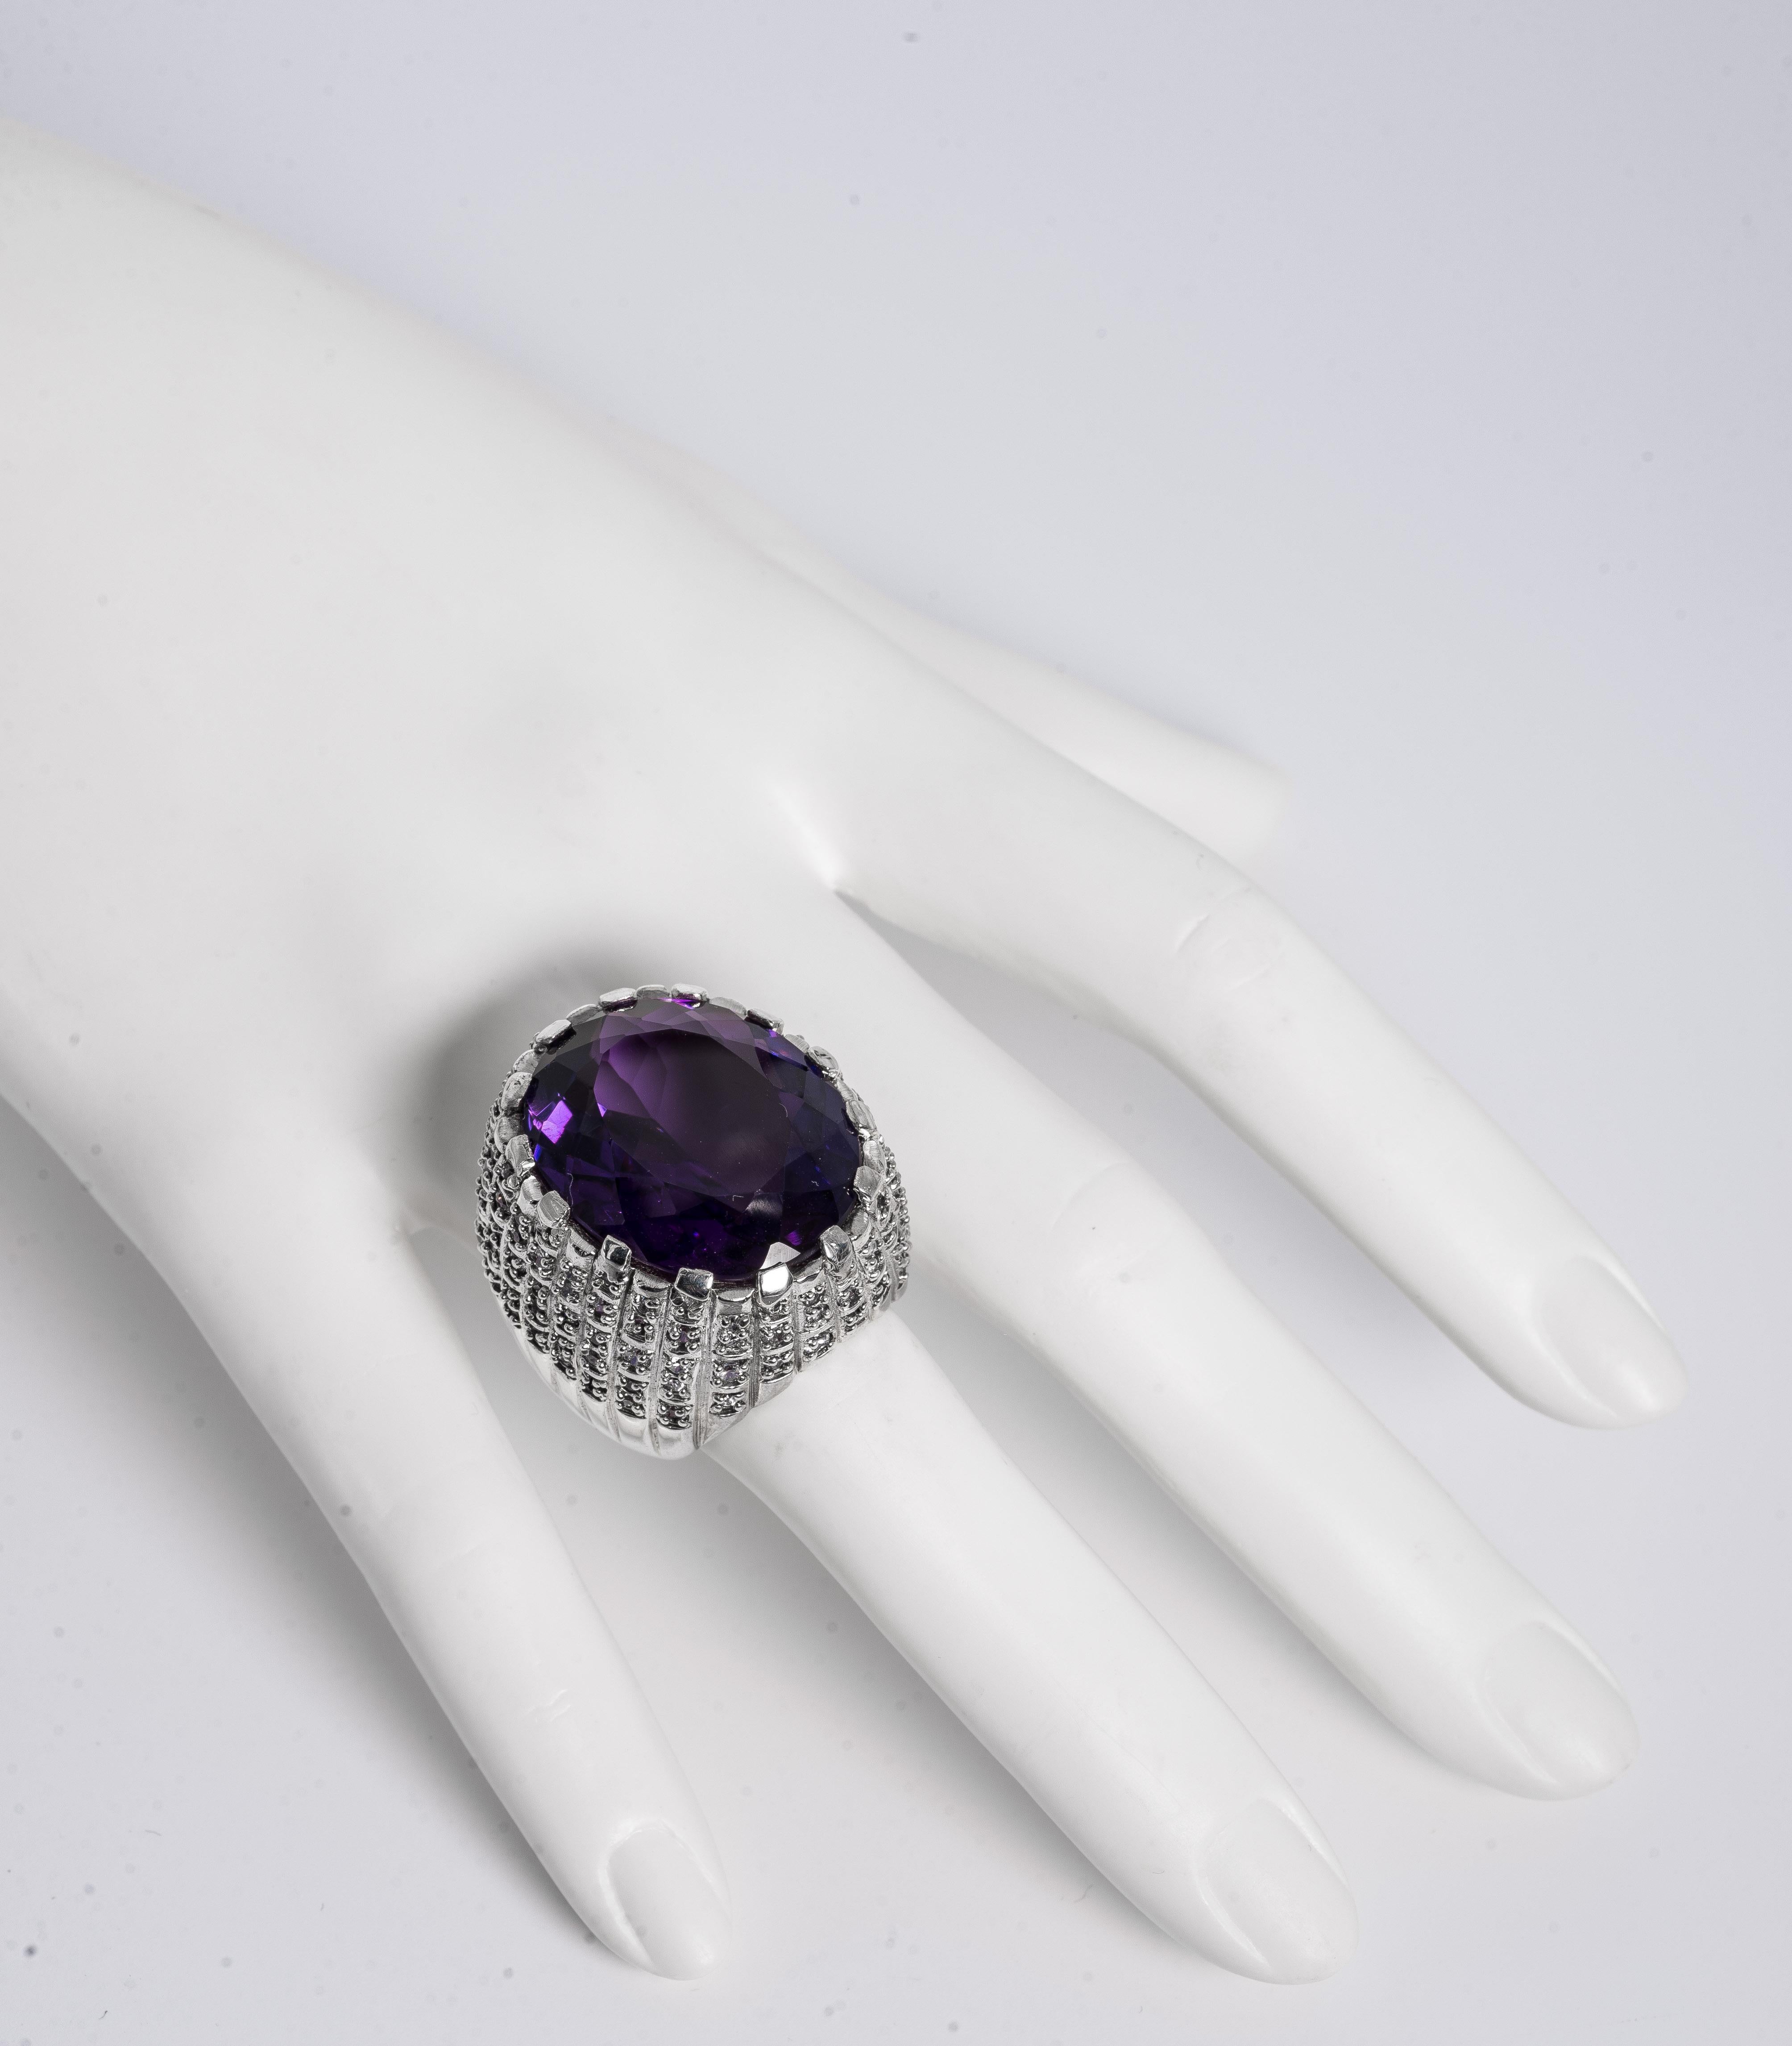 Large Real Amethyst Set In A  CZ Pave Sterling Chunky Ring
This is a big ring statement ring!  measures 1 1/4inch diameter over half an inch off the the finger size 7.5 !